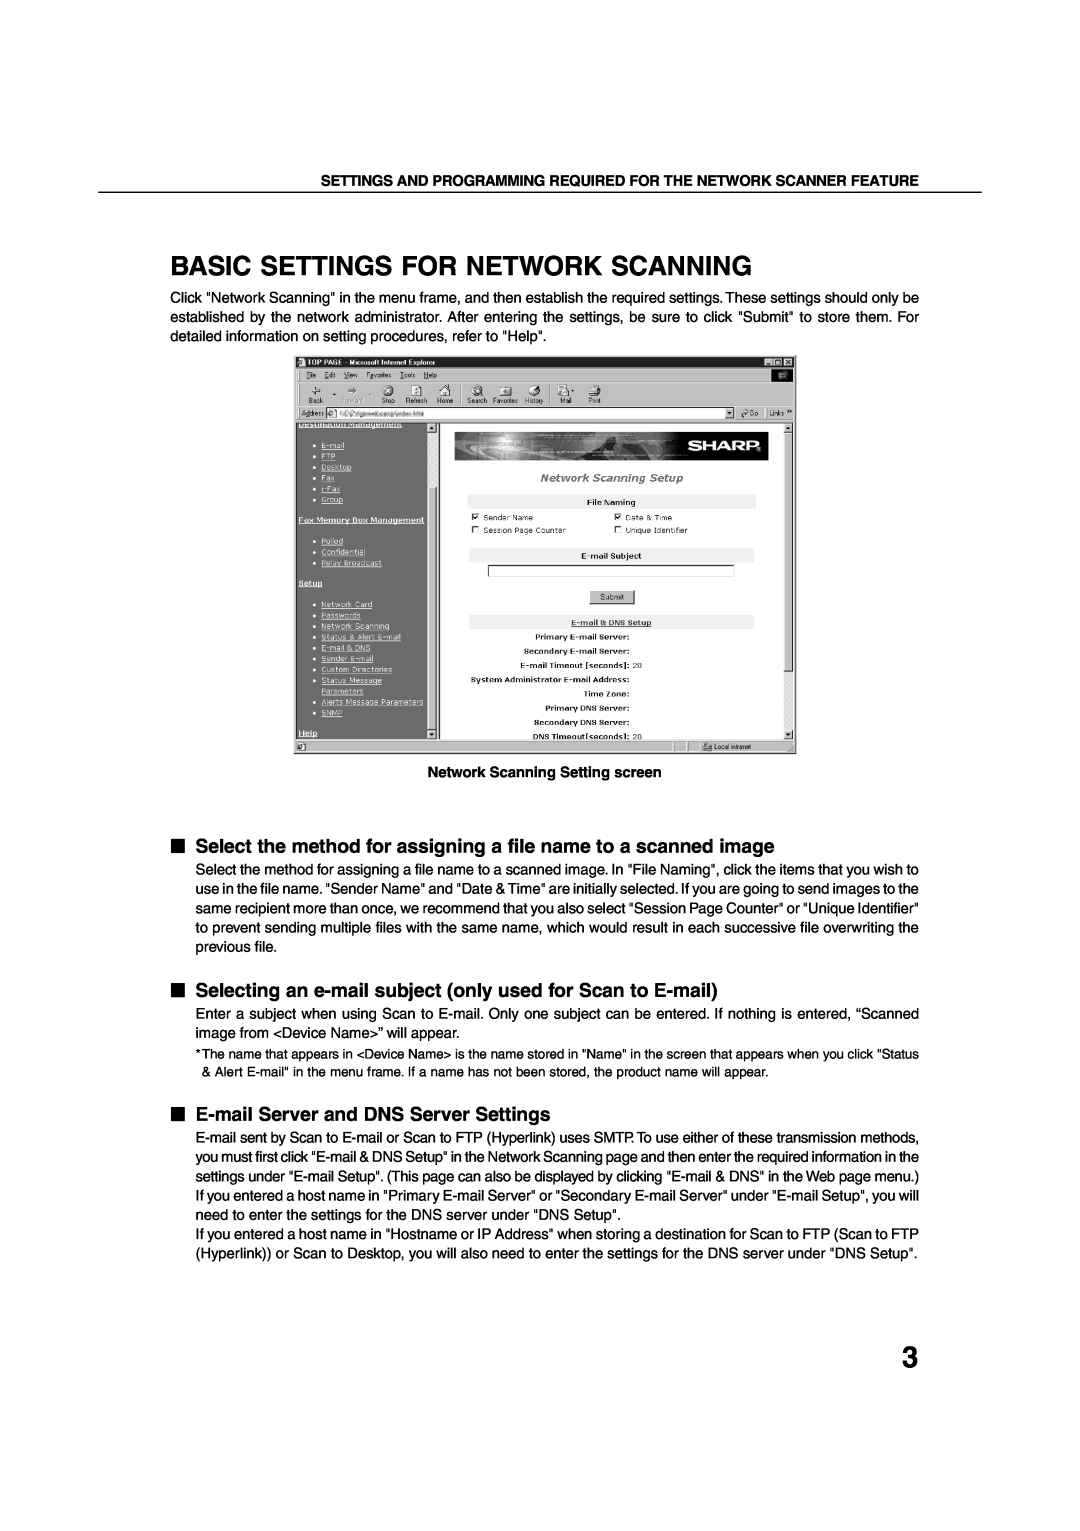 Sharp 3500, 4500, 450M Basic Settings For Network Scanning, Select the method for assigning a file name to a scanned image 